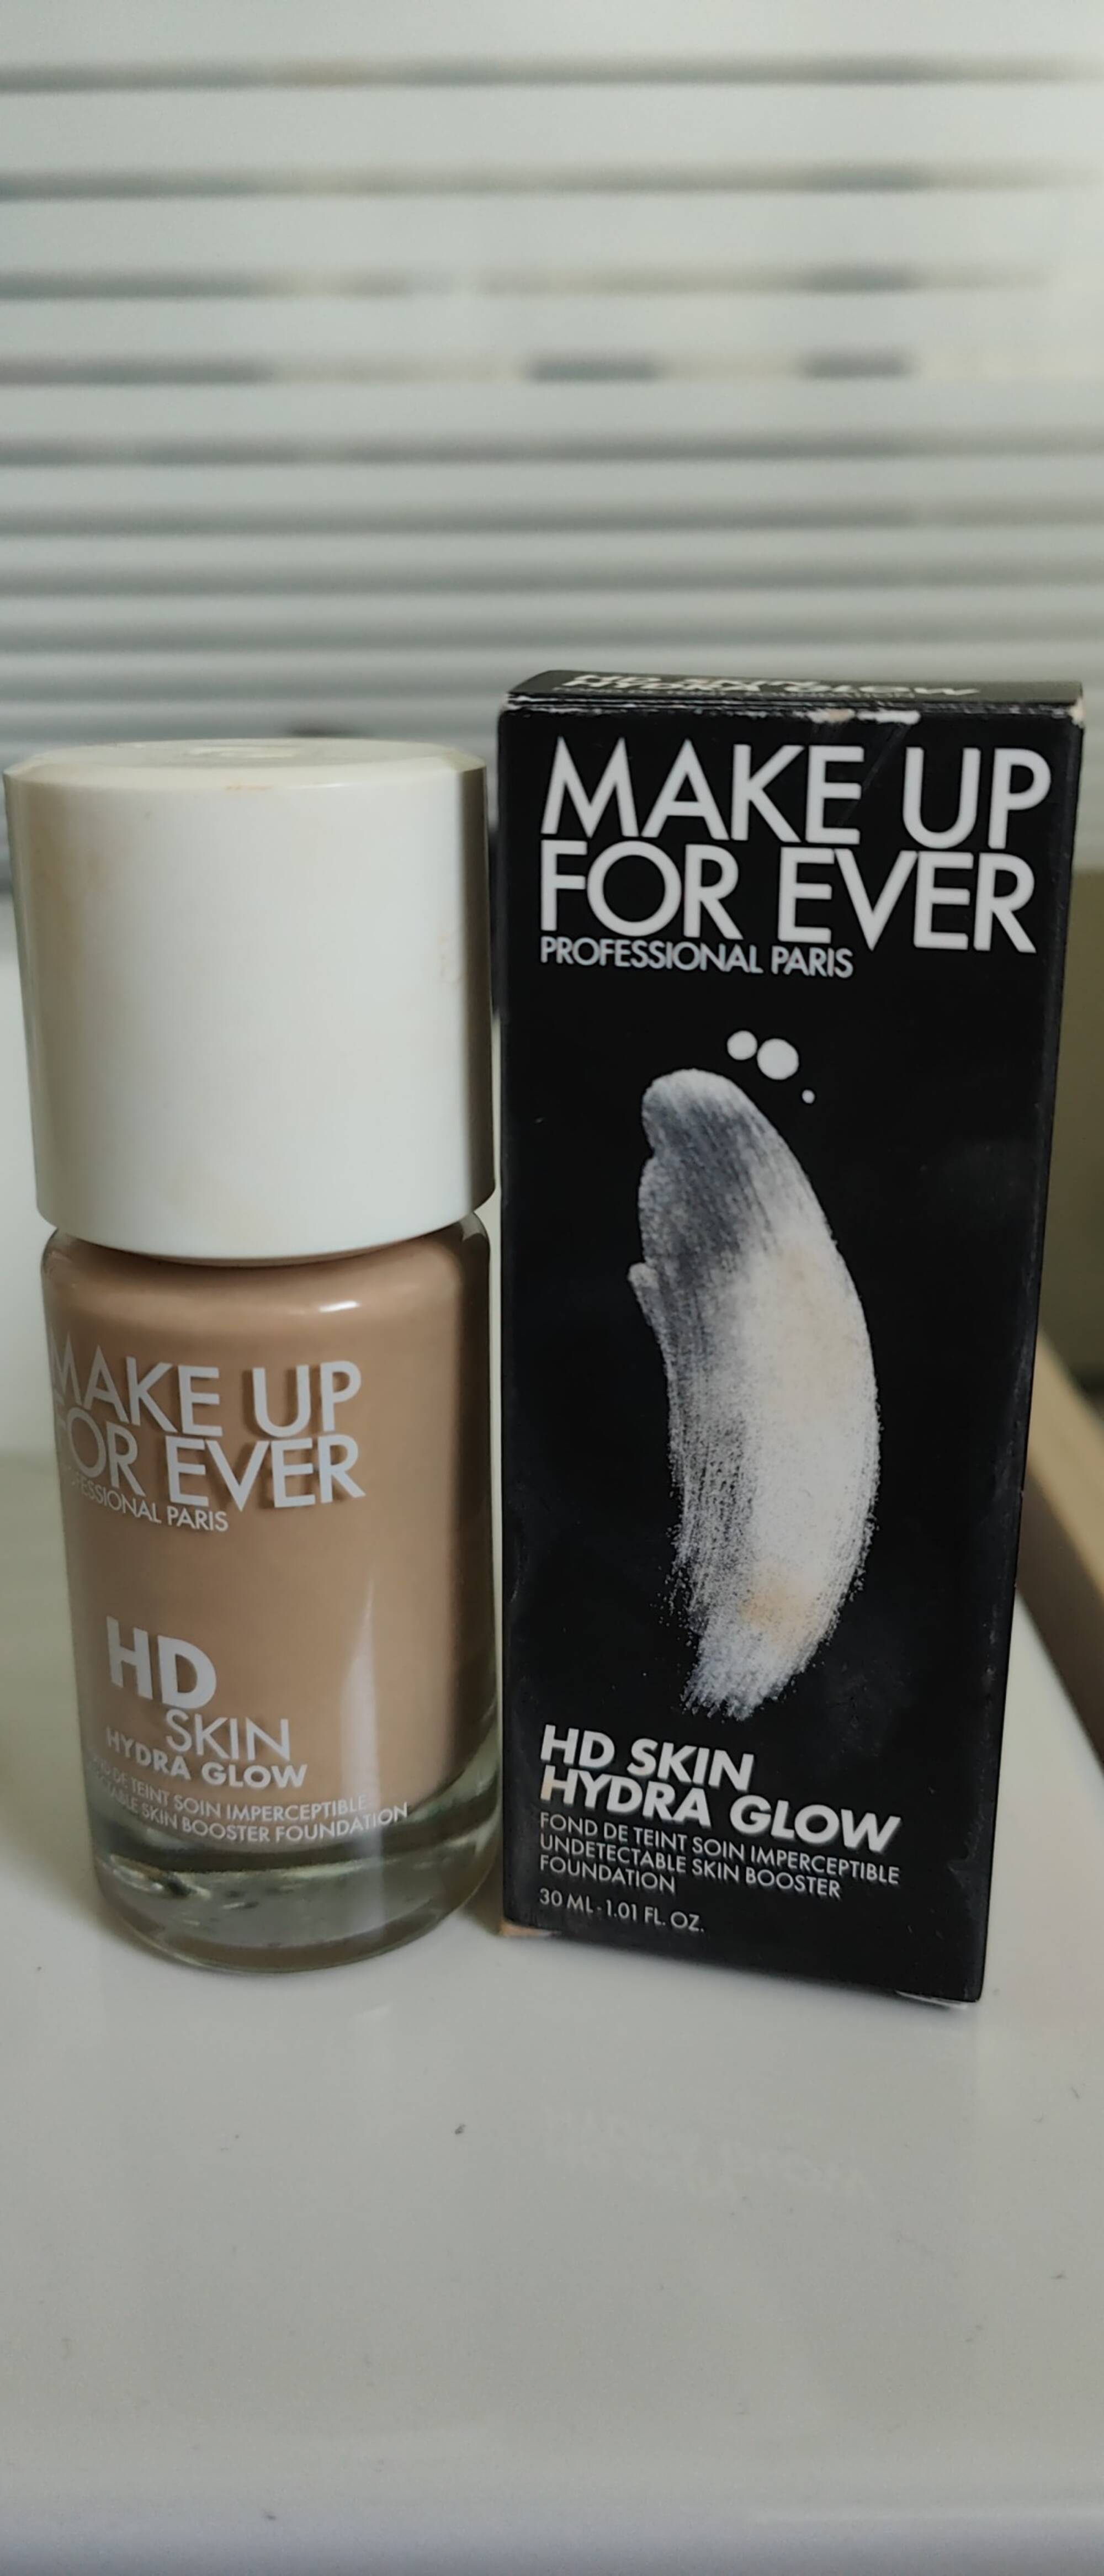 MAKE UP FOR EVER - HD skin hydra glow - Fond de teint soin imperceptible